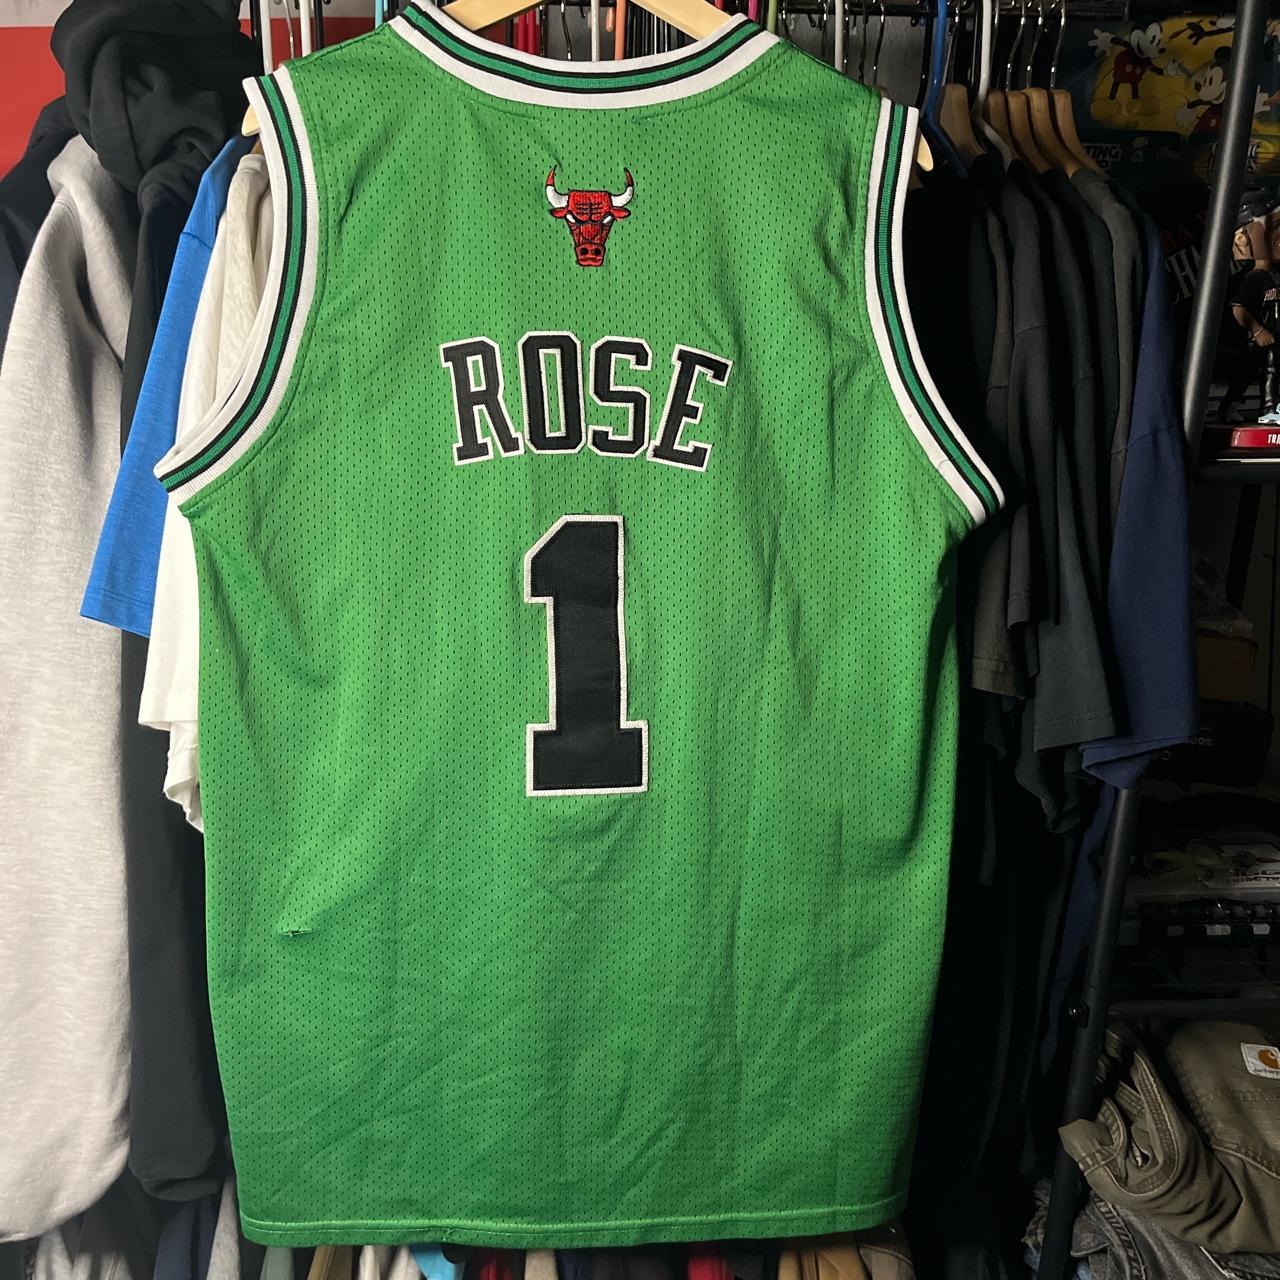 NBA Men's Green and Red Vest (3)